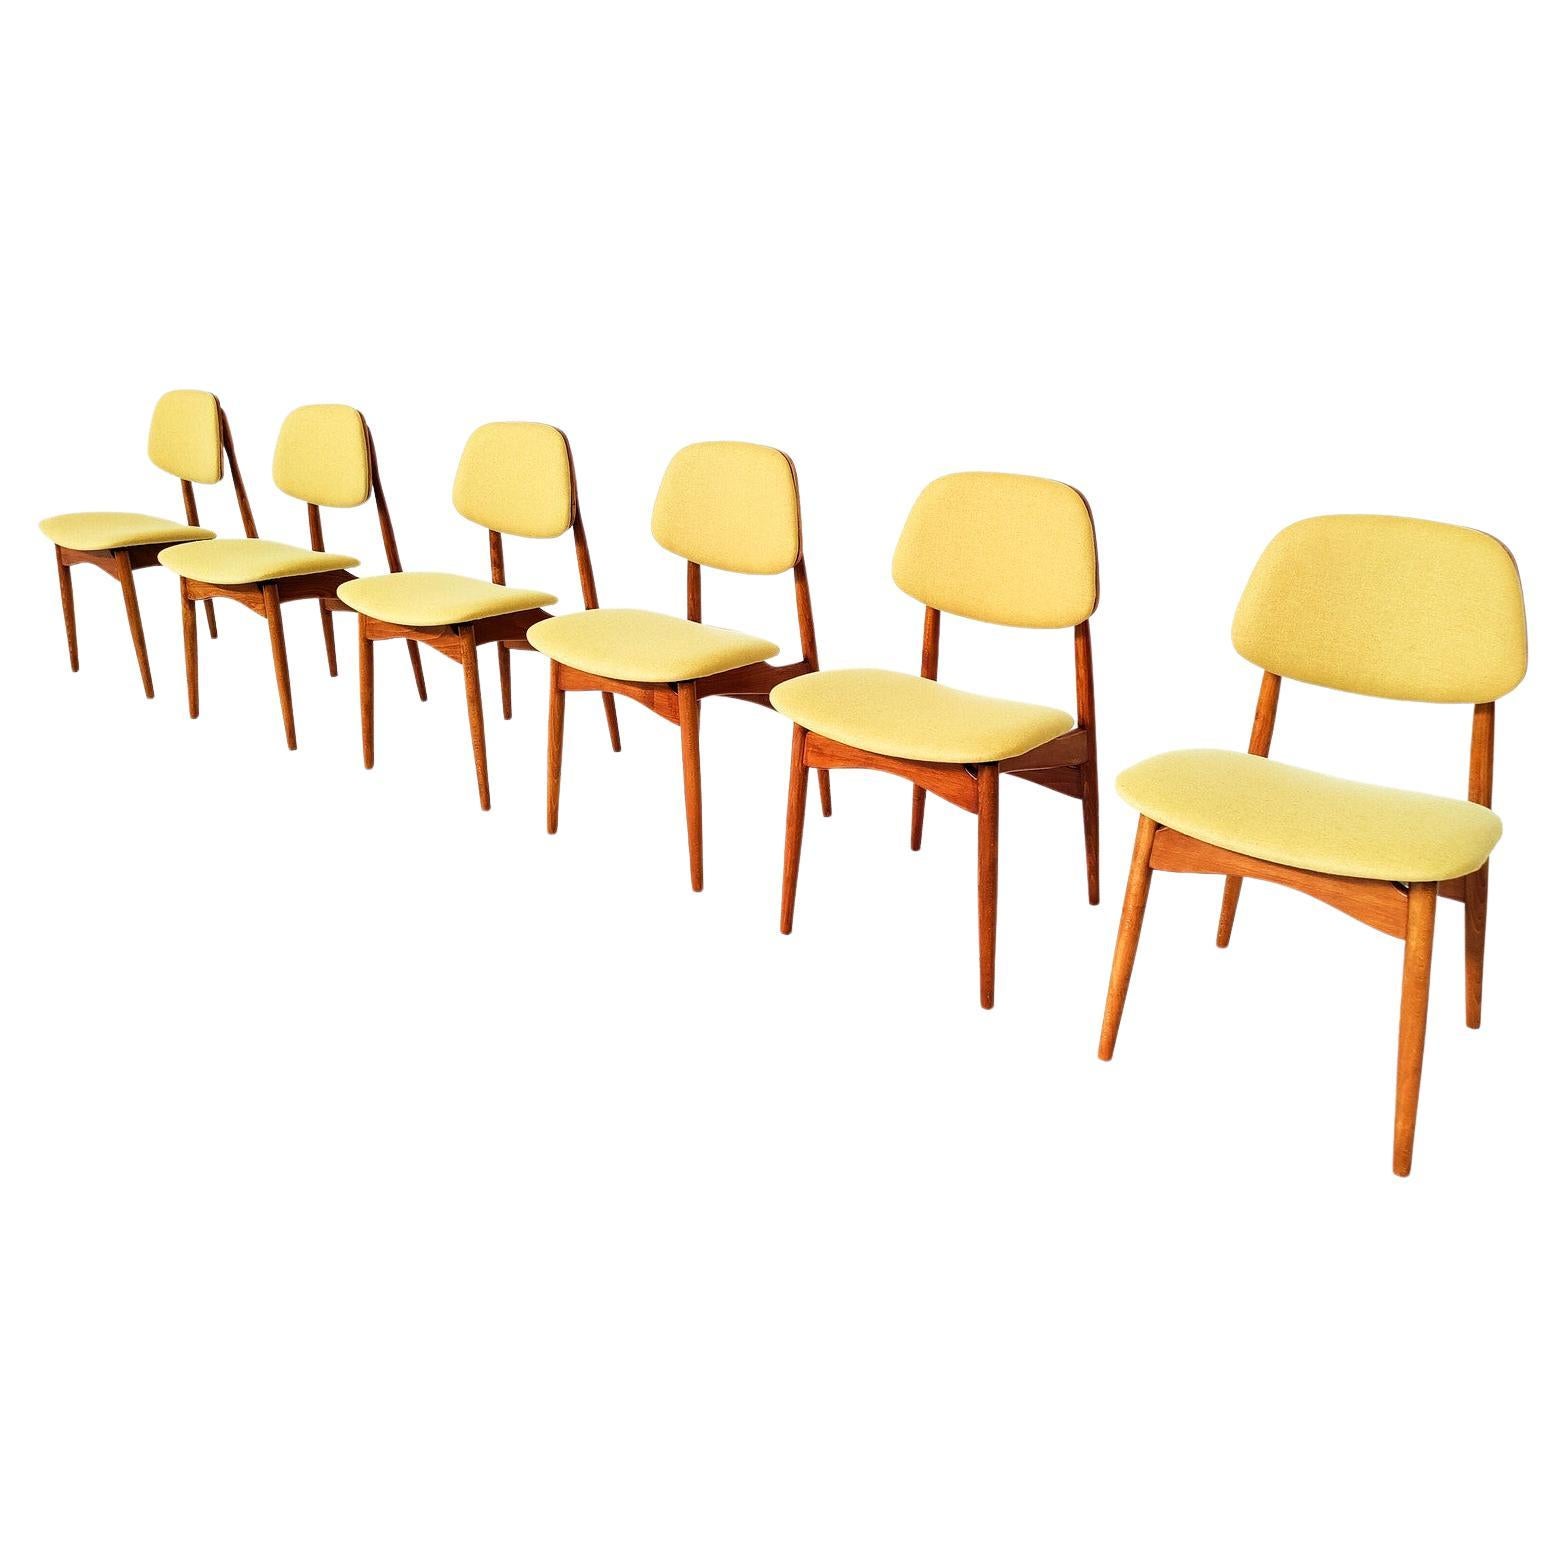 Mid-Century Modern Set of 6 Dining Chairs, Italy, 1960s For Sale